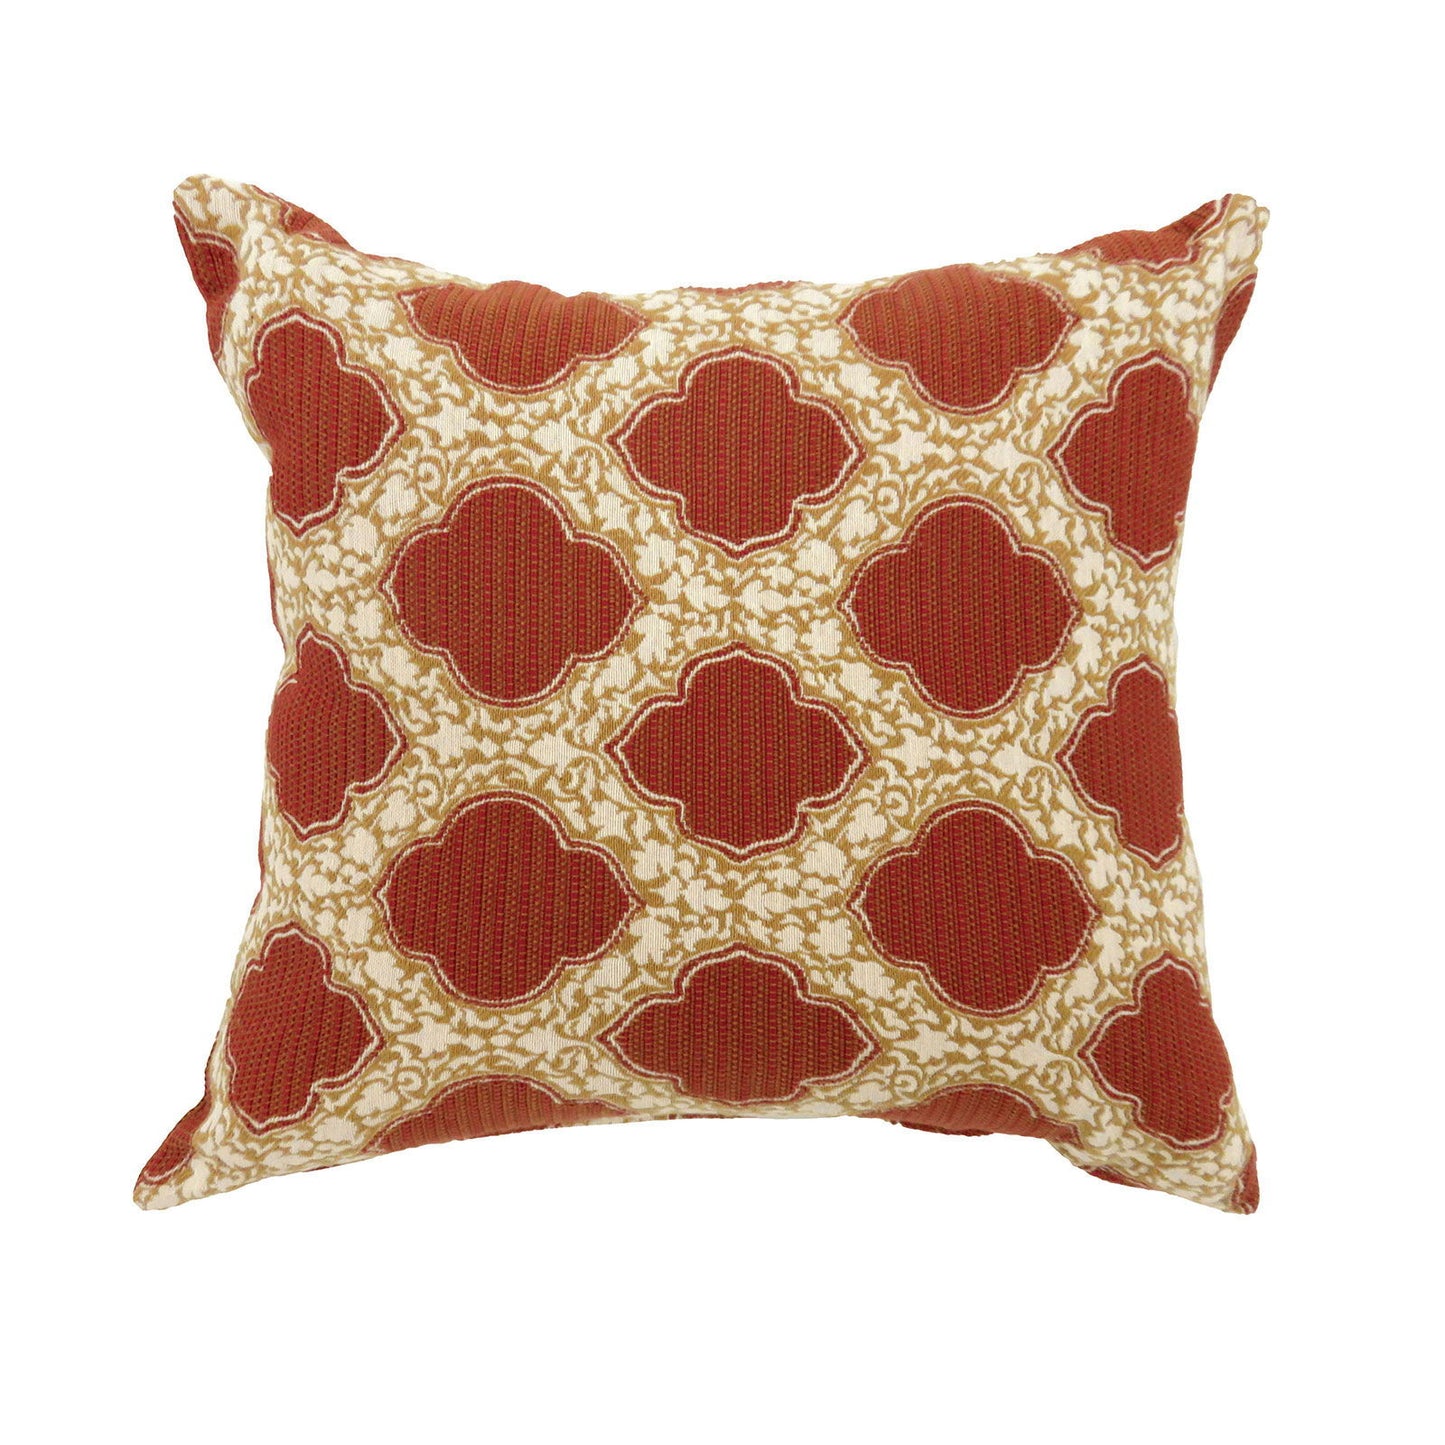 Roxy - Pillow (Set of 2) - Red